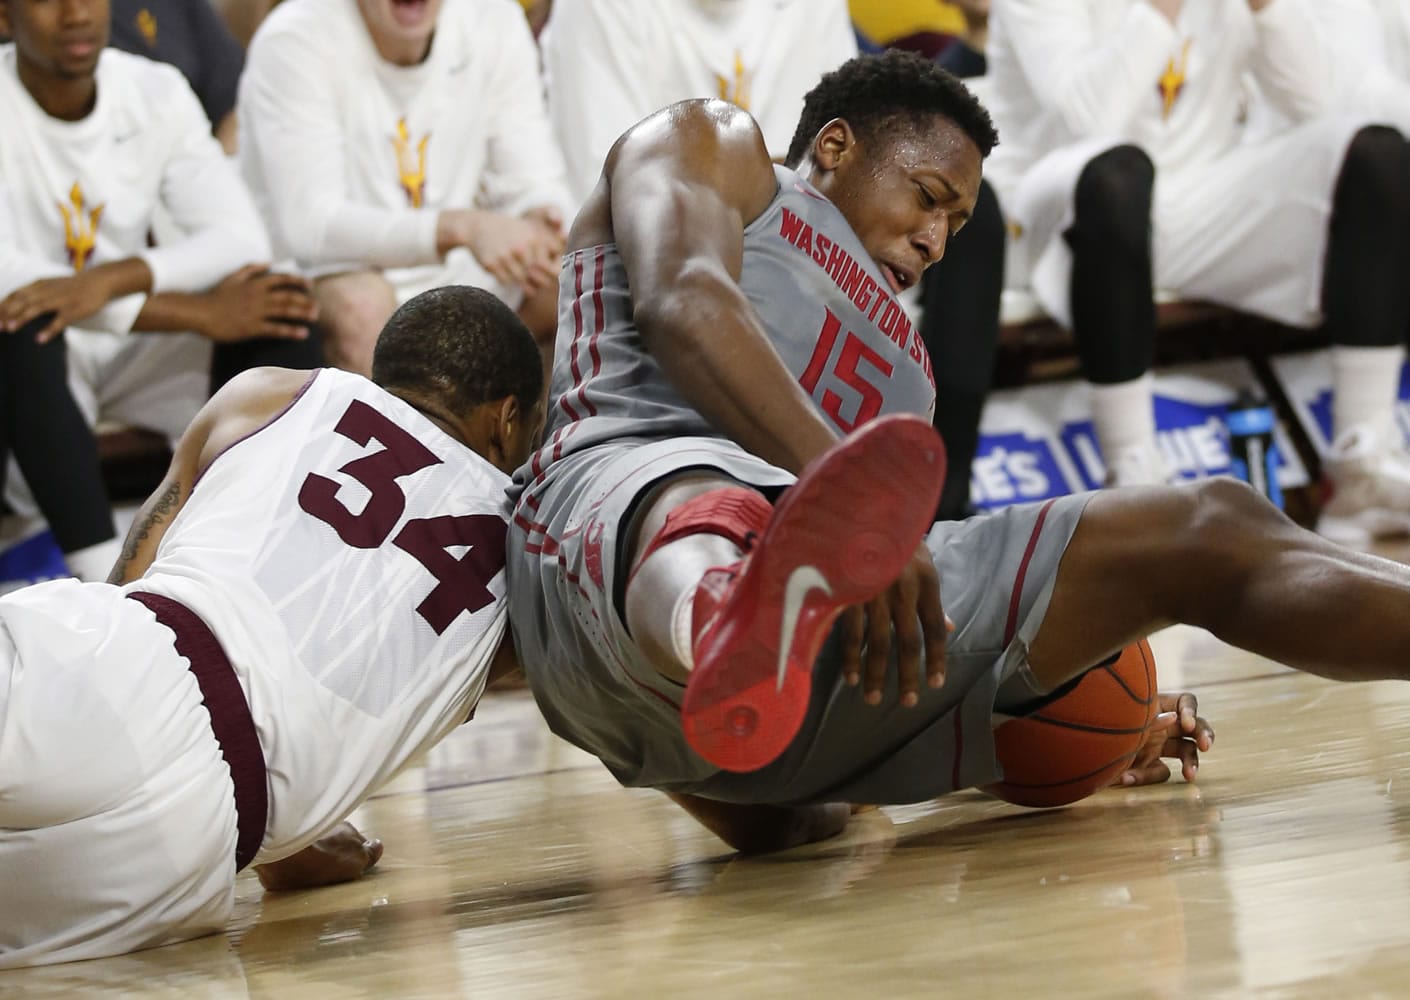 Arizona State guard Jermaine Marshall, left, and Washington State forward Junior Longrus scramble for the ball during the first half Sunday at Tempe, Ariz.